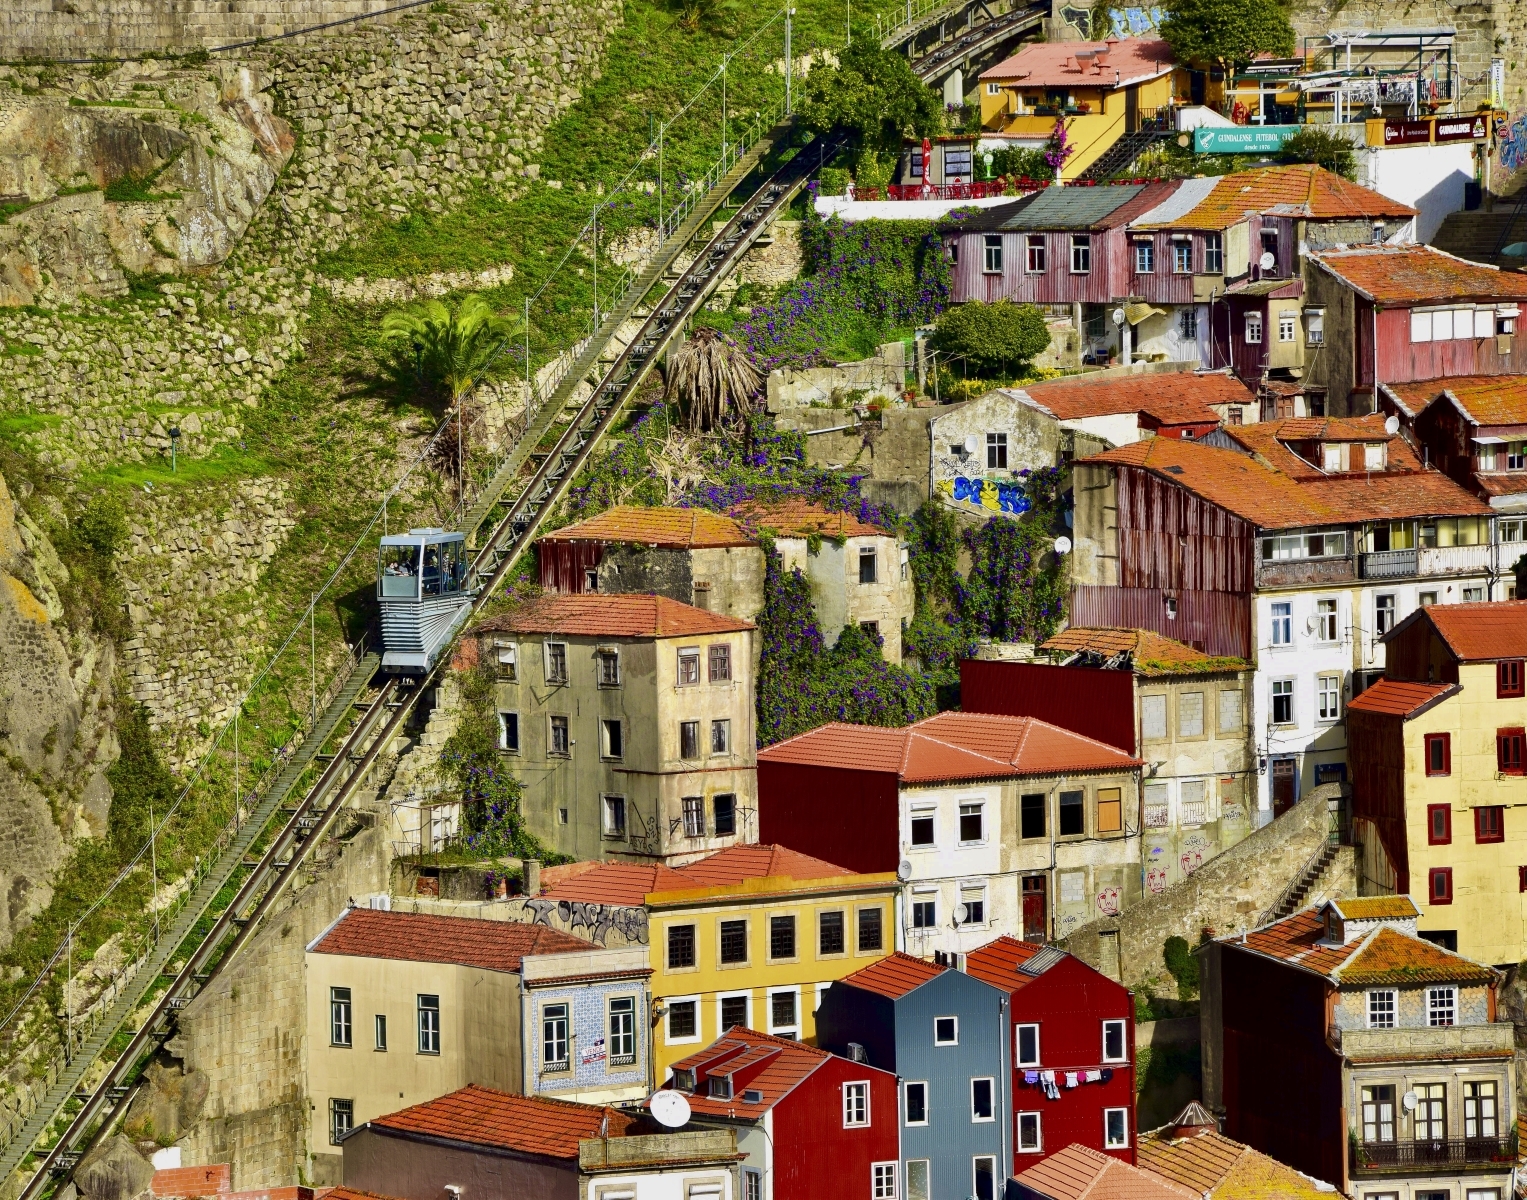 DSC-0056-3-Hillside-Dwellings-of-Oporto-Portugal-PB-1-Place-by-Dick-Young-MR